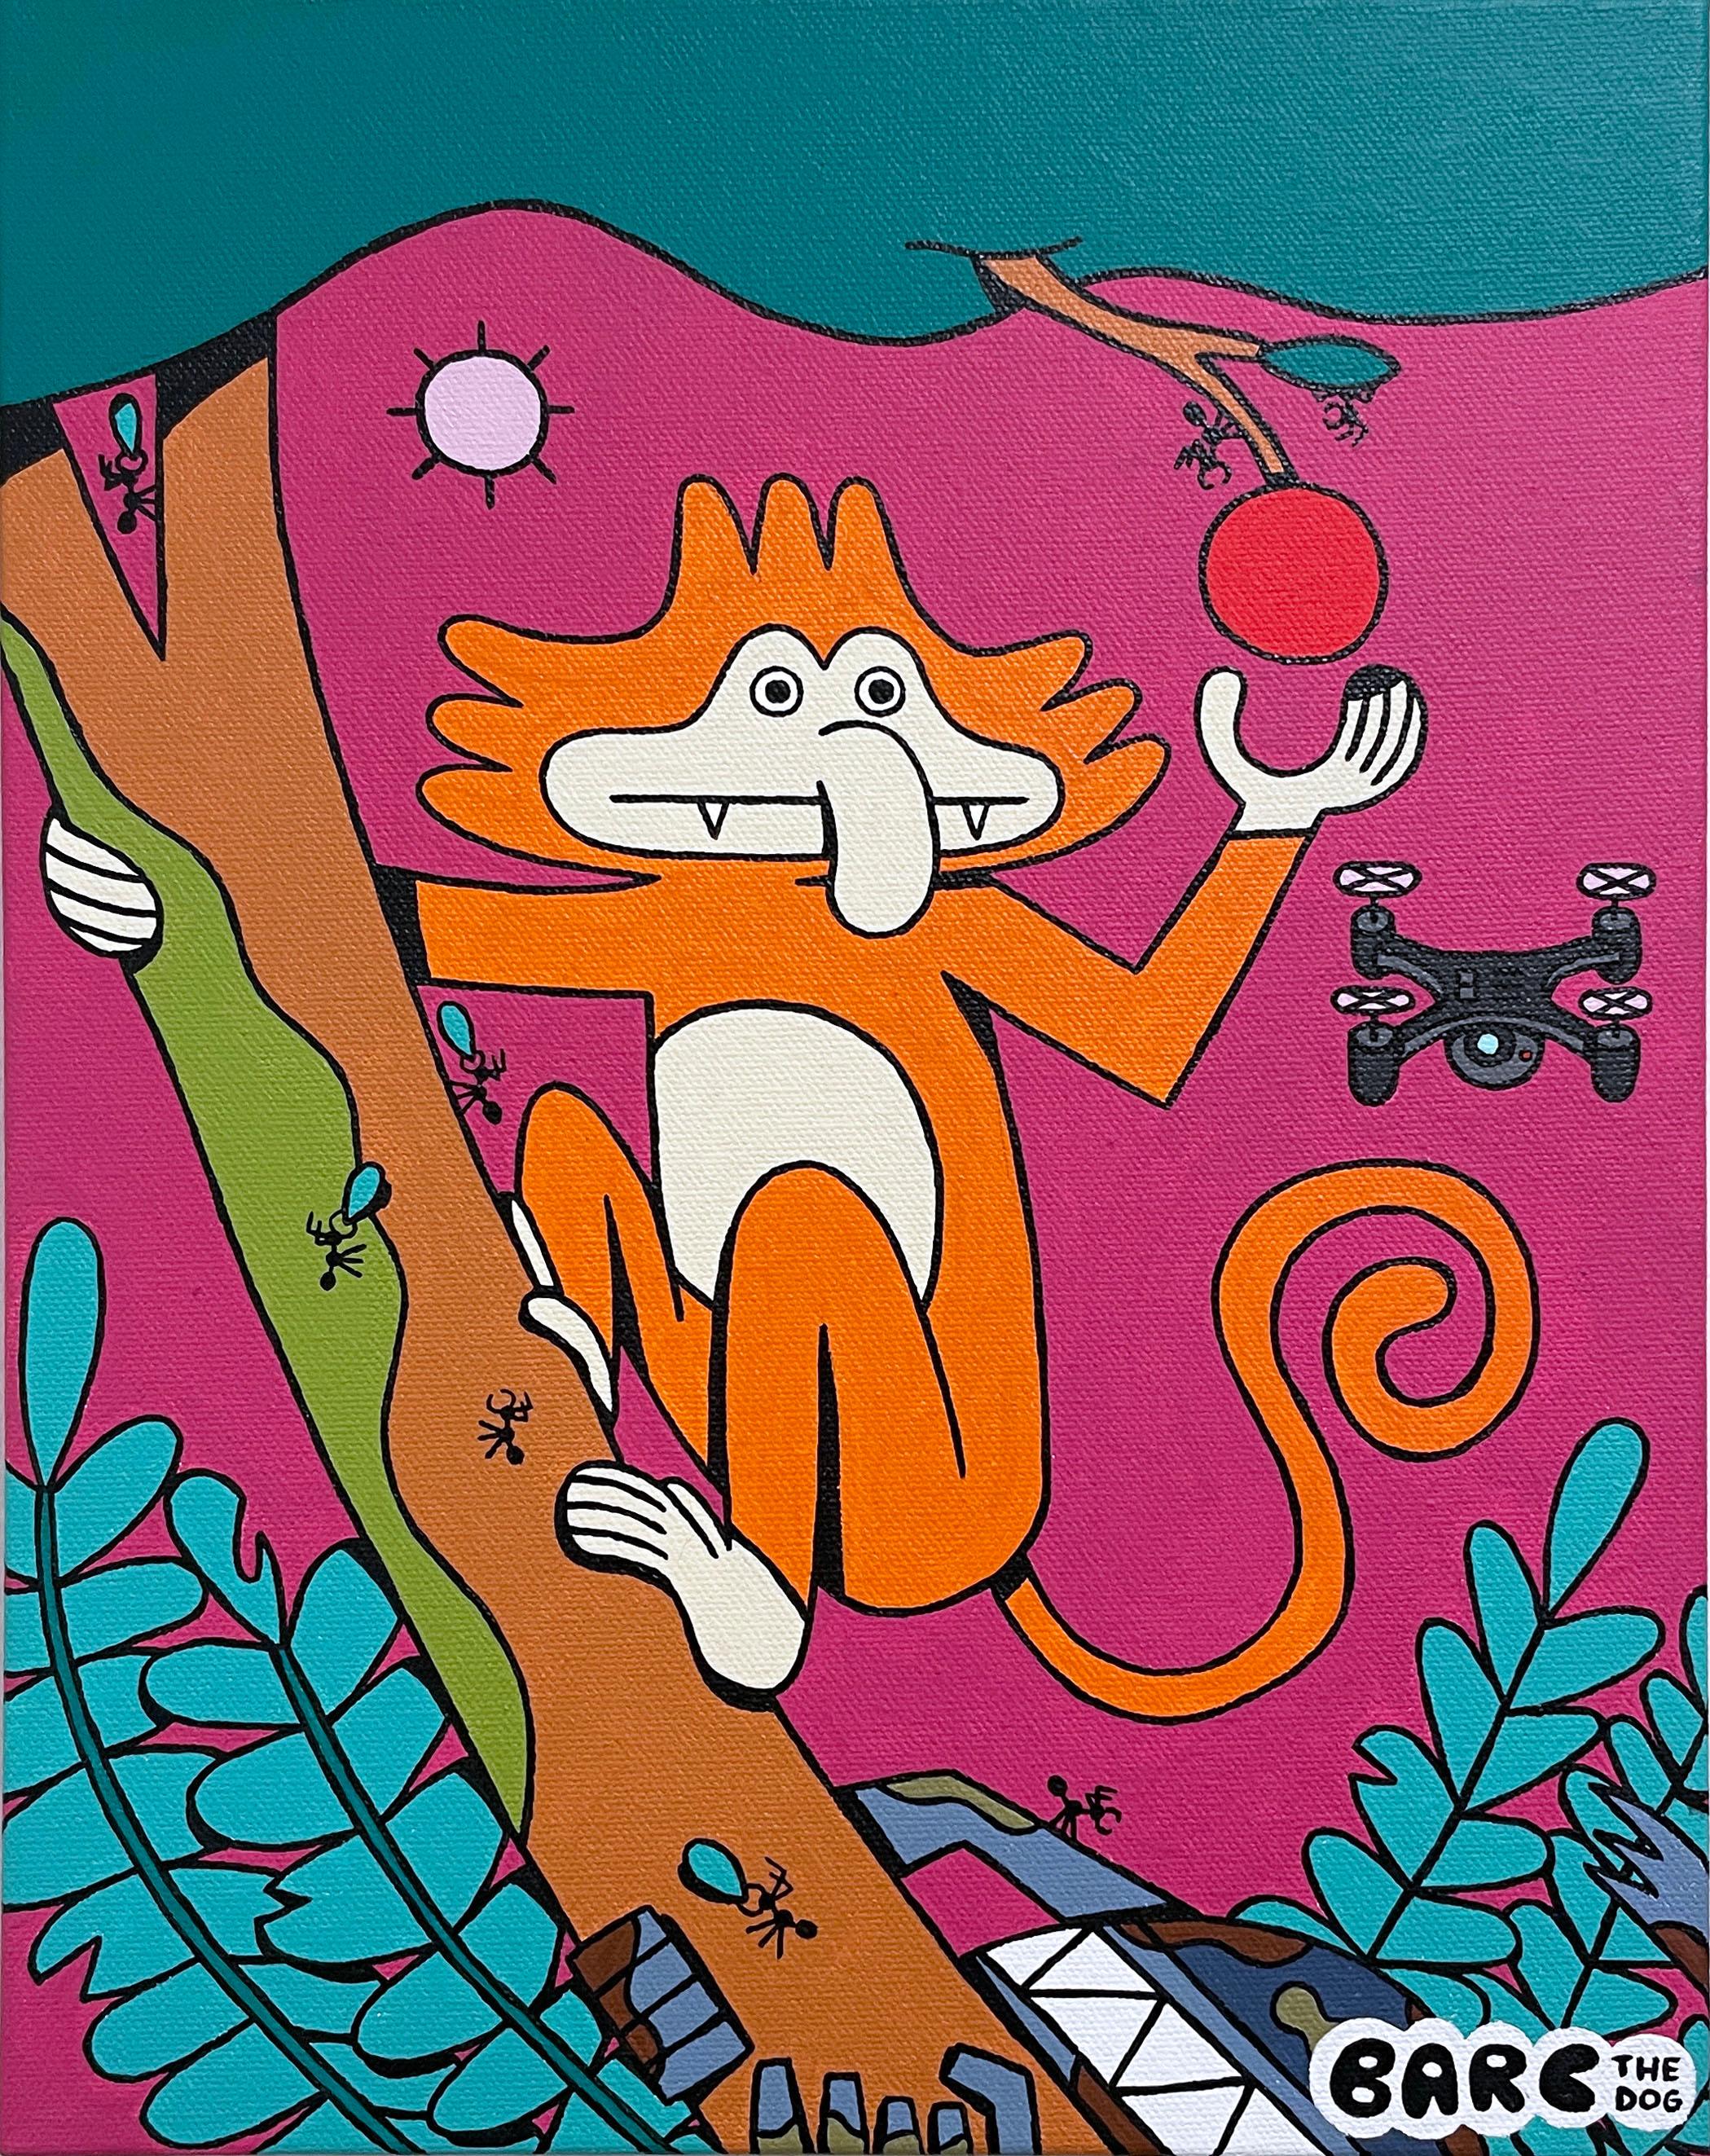 Dream Monkey by BARC the dog, comic book style, apple tree, orange, pink, green